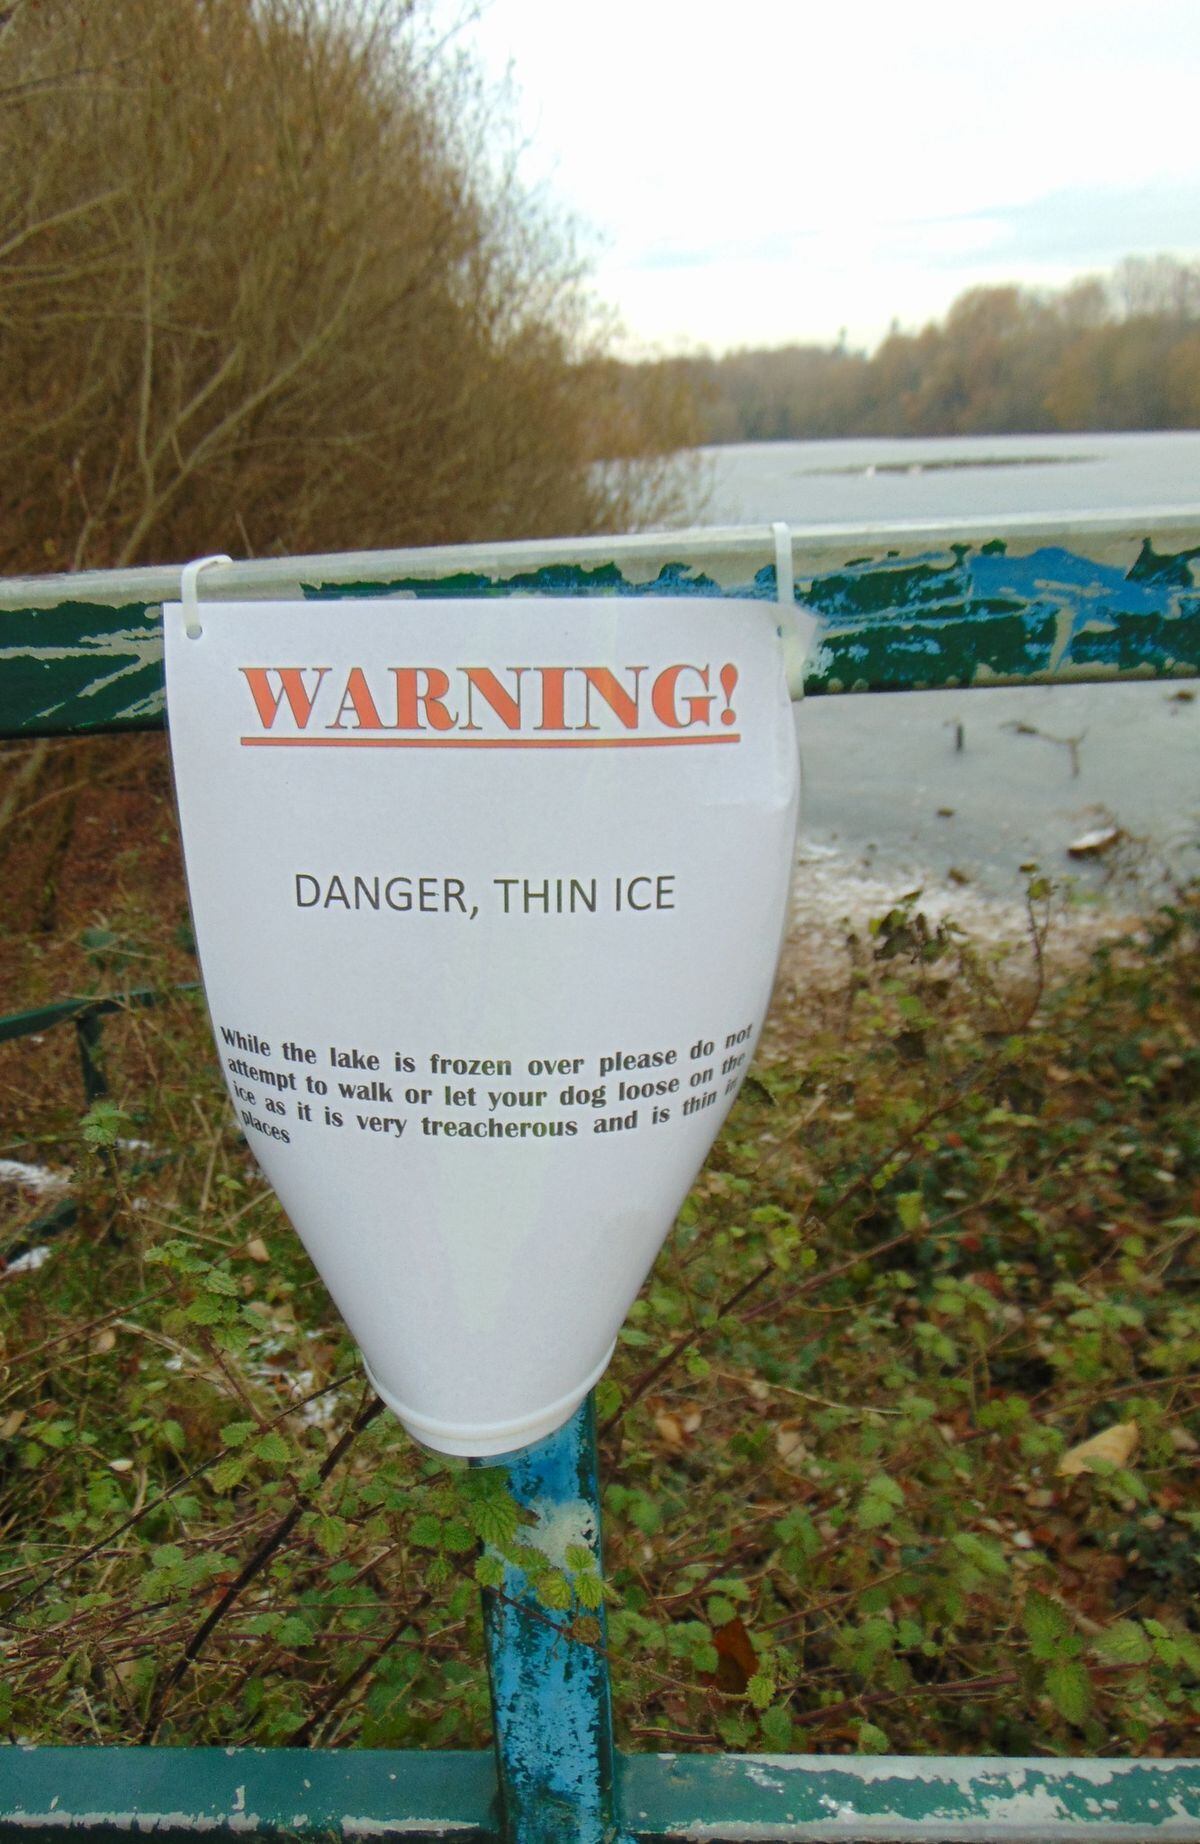 The make-shift sign put up. Photo: The Friends of Queslett Nature Reserve